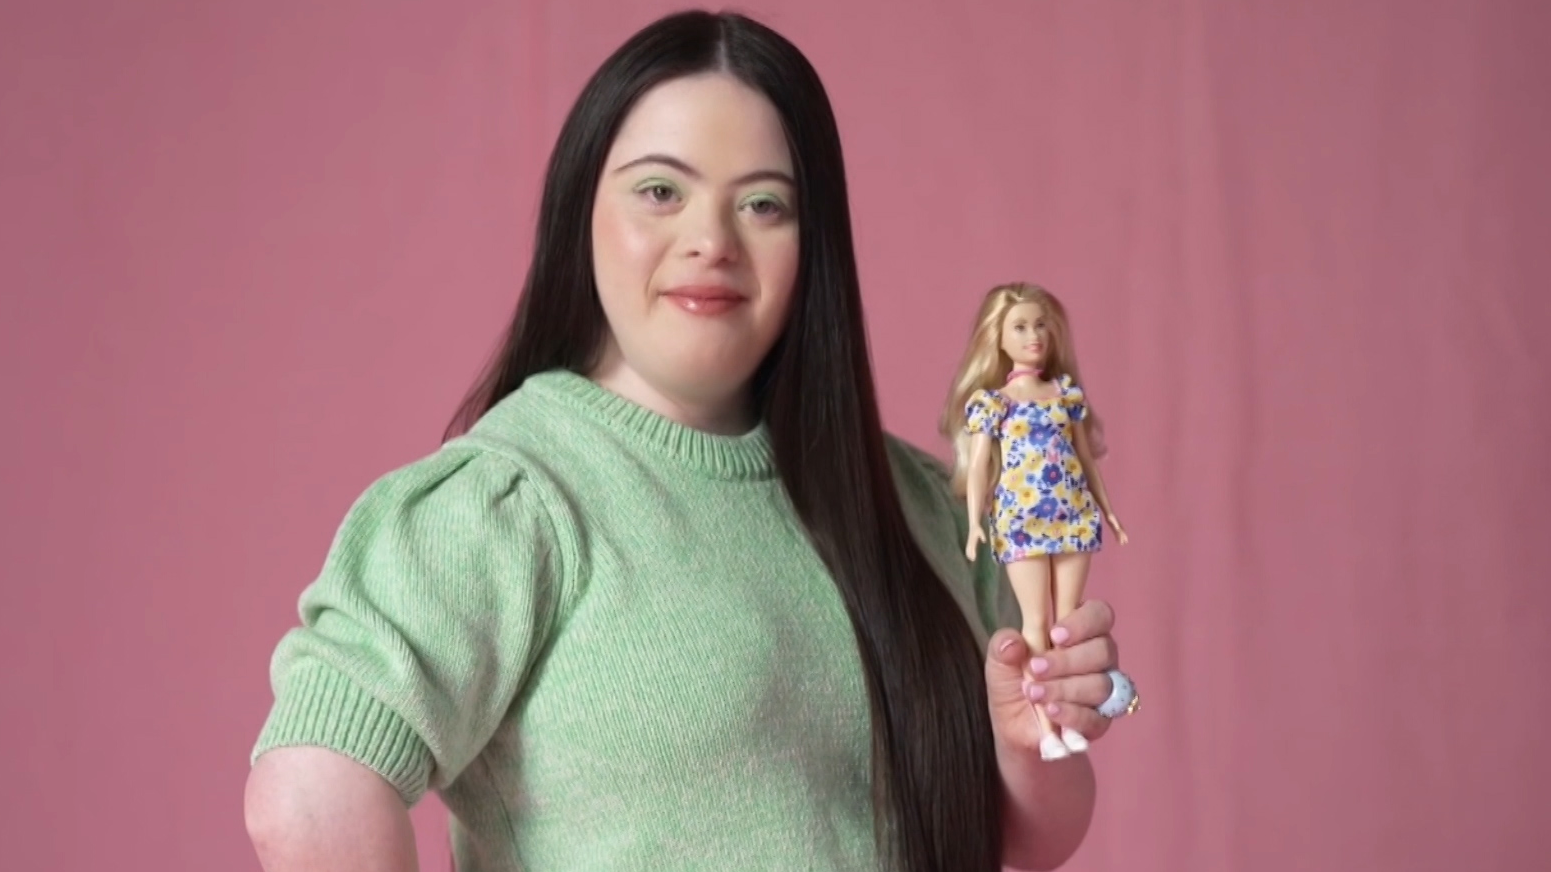 A Down Syndrome doll was released by Mattel in April. /CGTN Europe